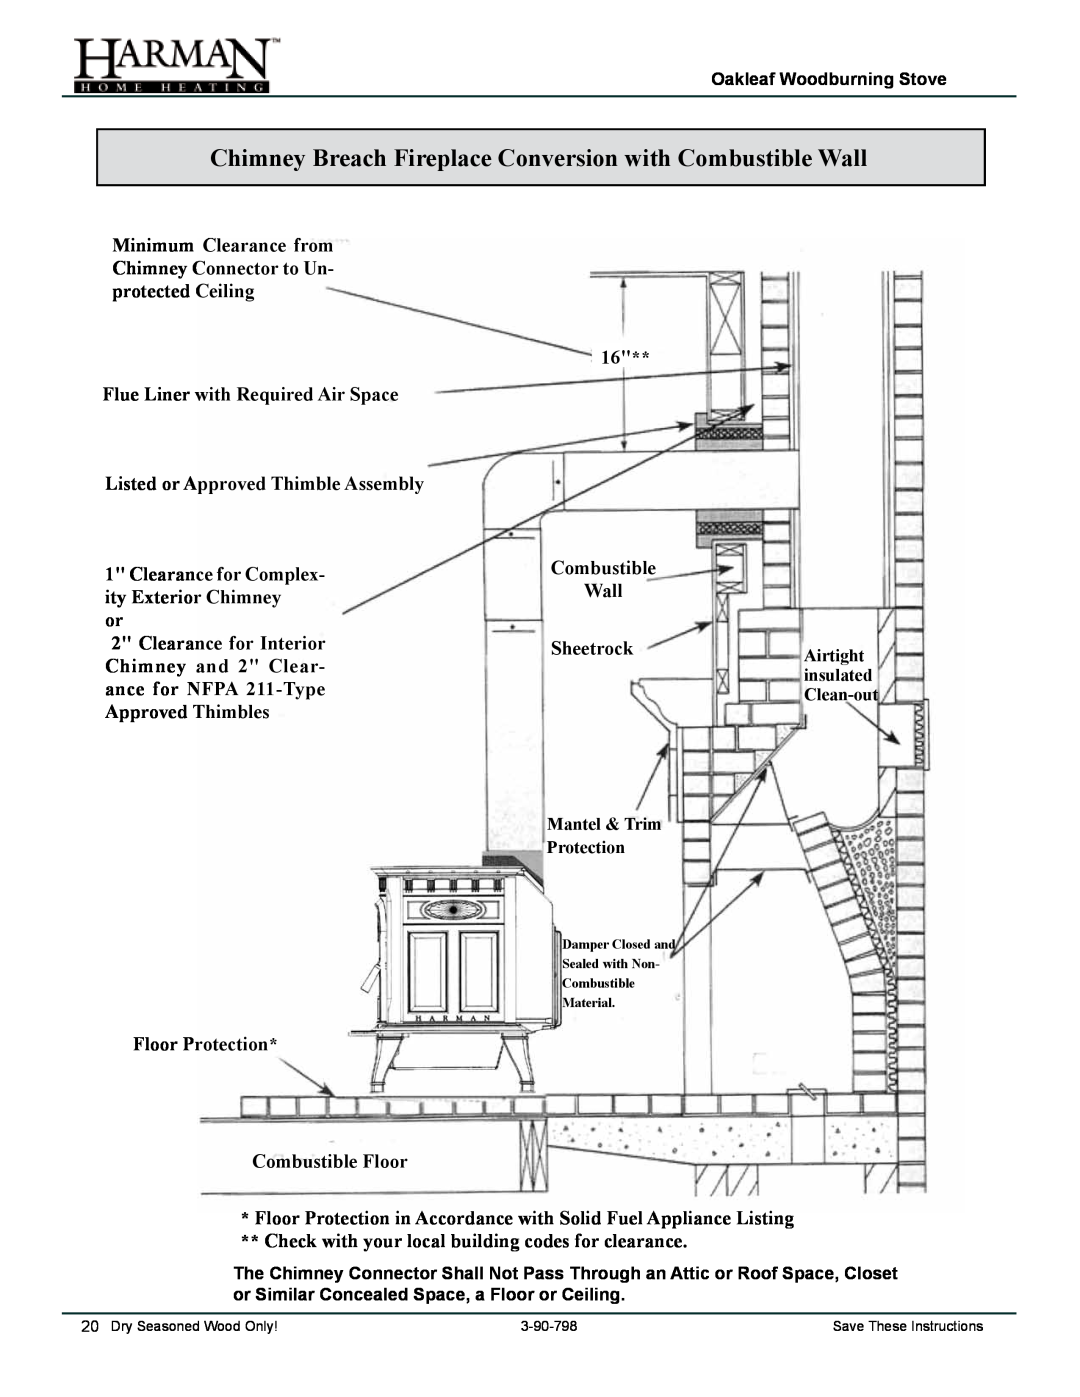 Harman Stove Company 1-90-797000 manual Flue Liner with Required Air Space 